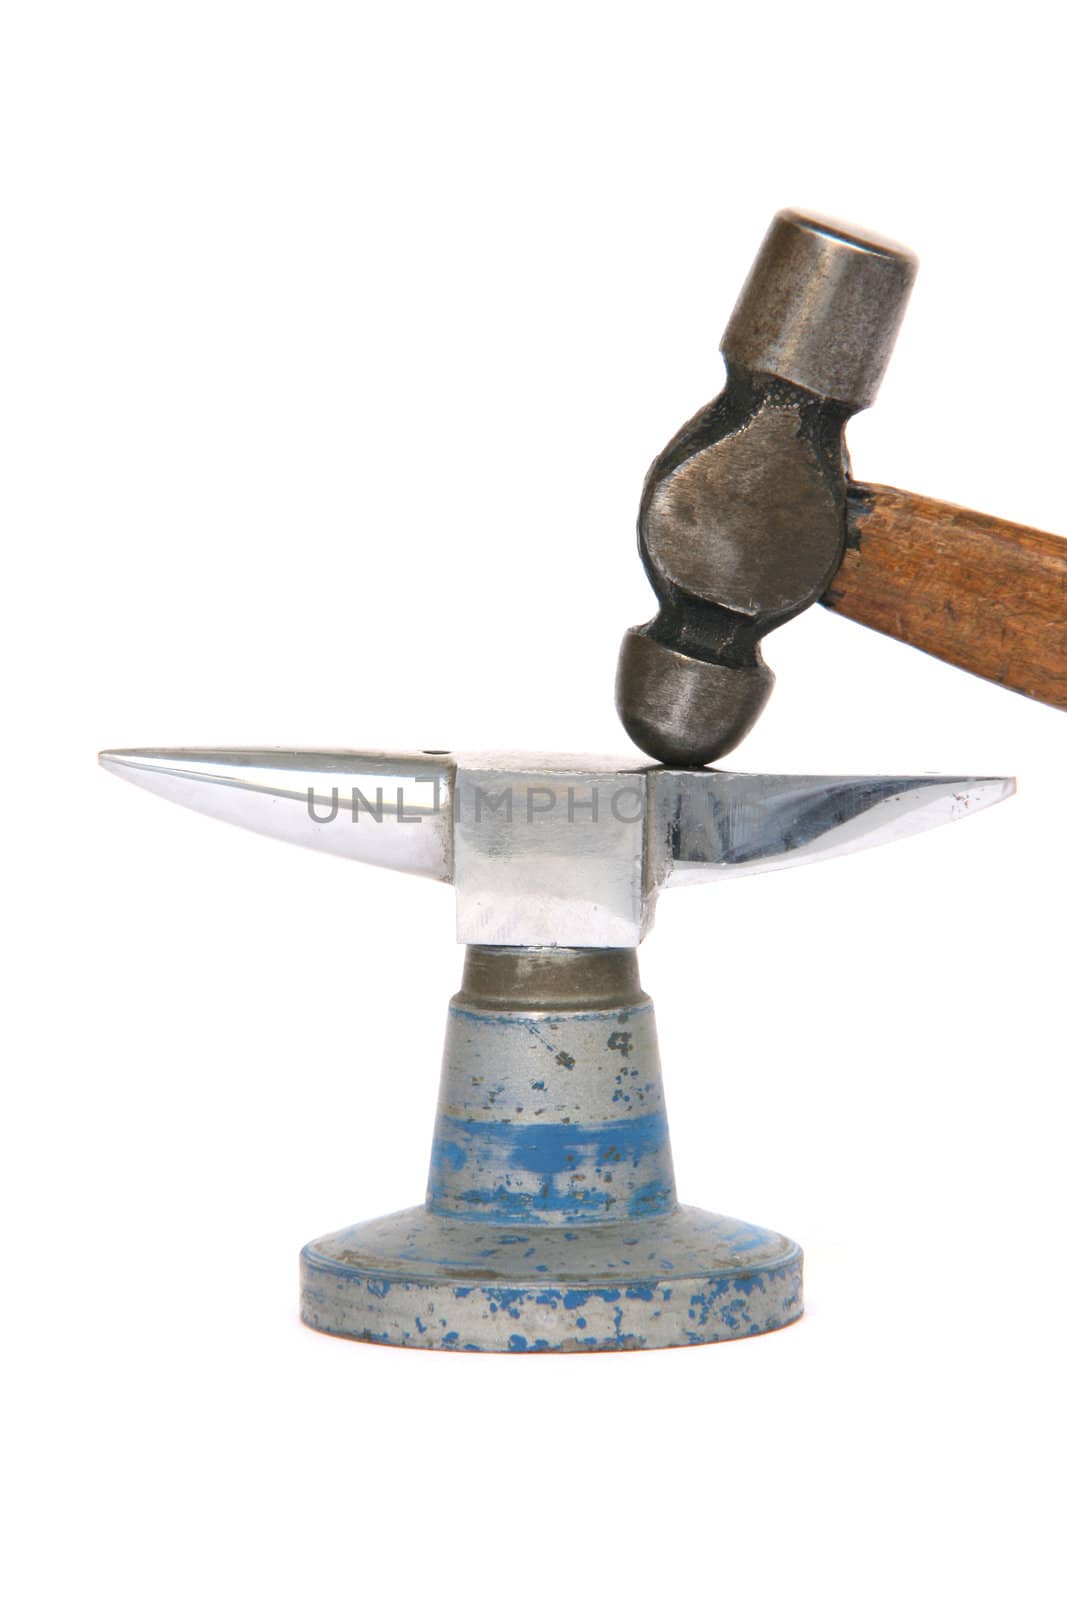 tiny inox anvil and small hammer detail isolated on white background